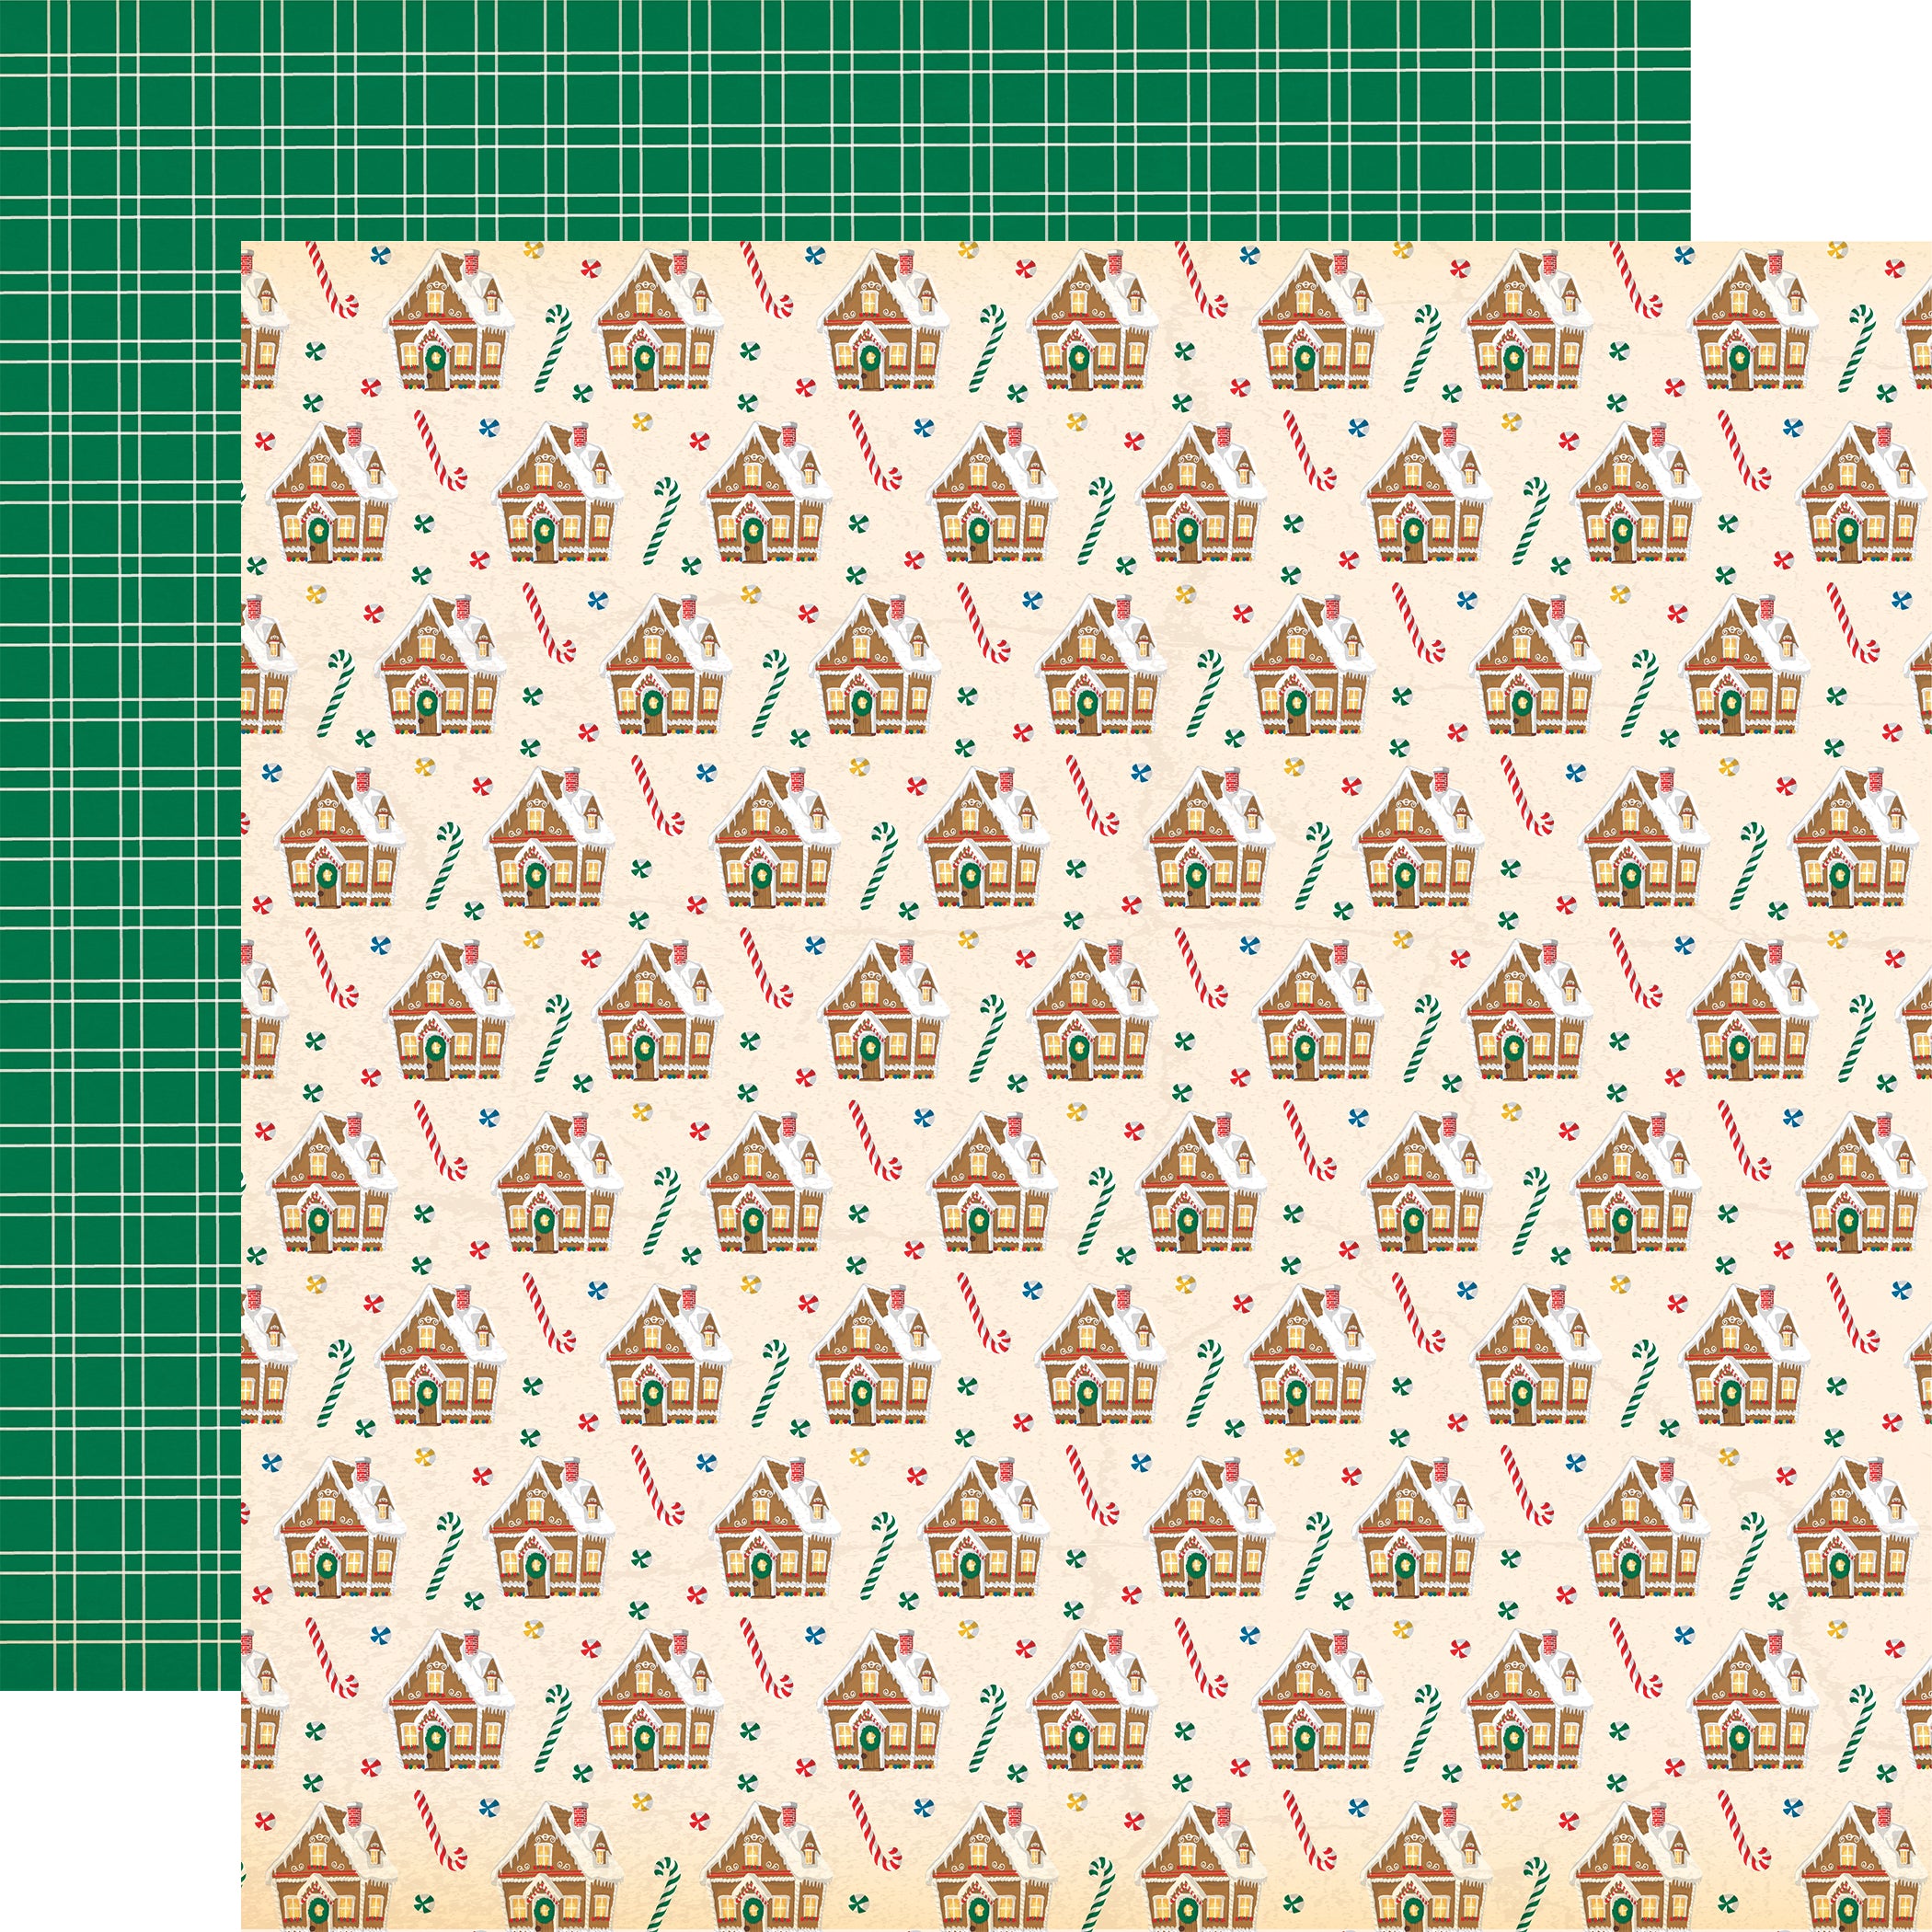 Season's Greetings Collection Gingerbread Lane 12 x 12 Double-Sided Scrapbook Paper by Carta Bella